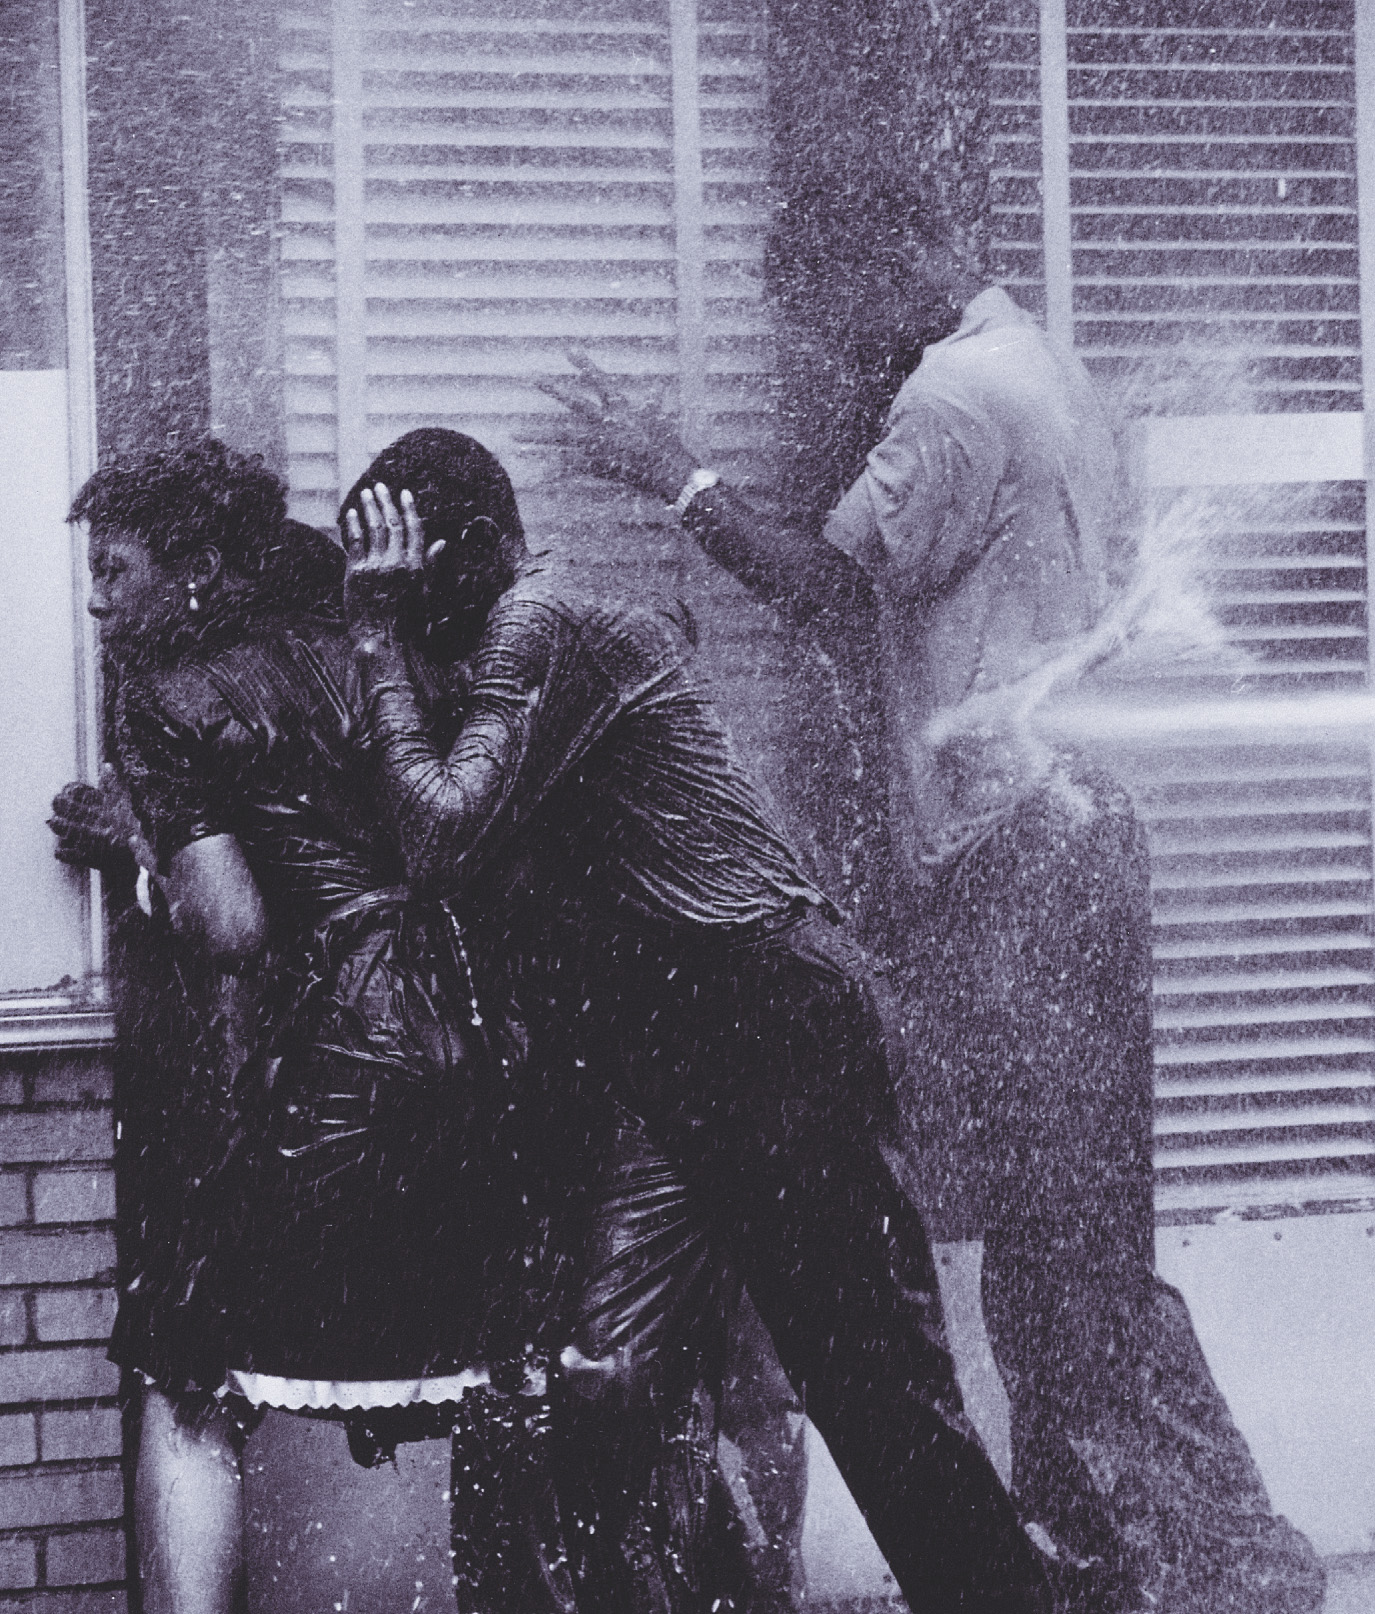 photo: water sprayed from a hose hits a group of African-Americans.